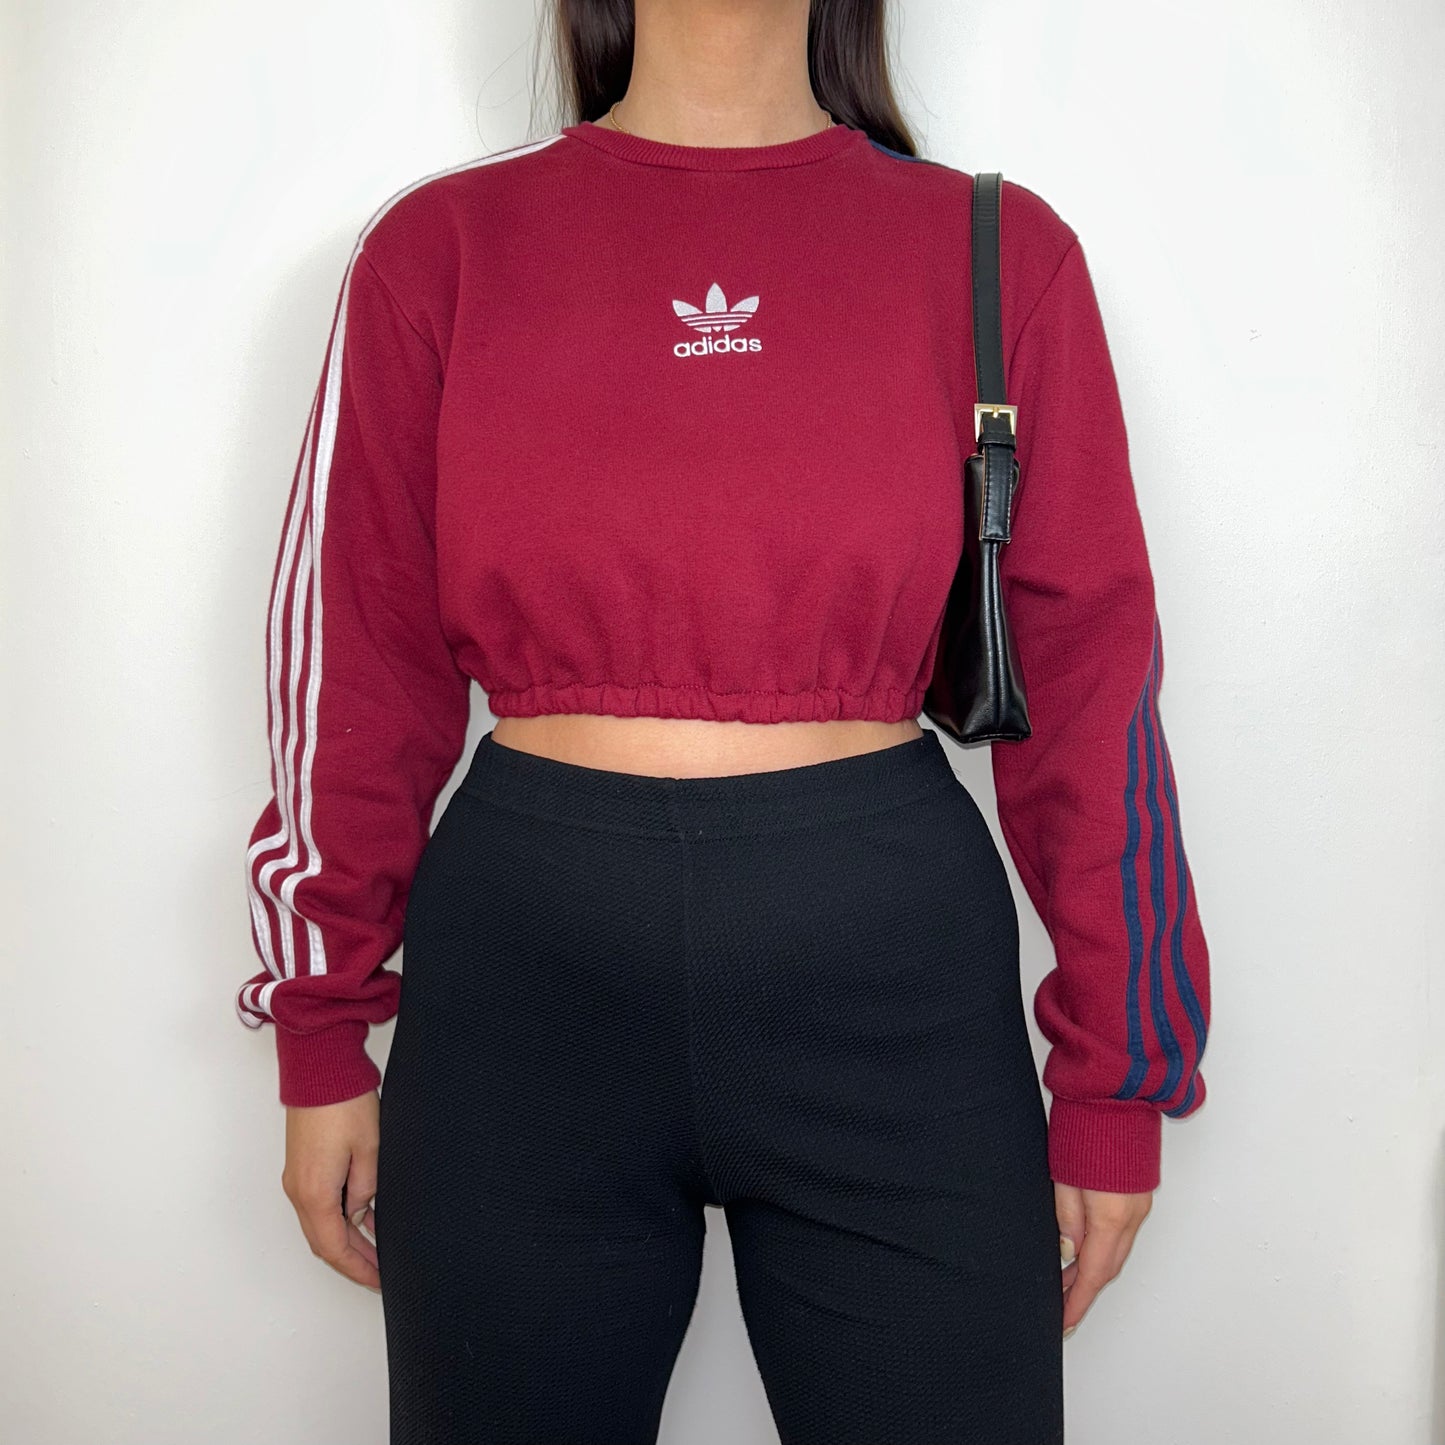 burgundy cropped sweatshirt with white adidas logo shown on a model wearing black trousers and a black shoulder bag